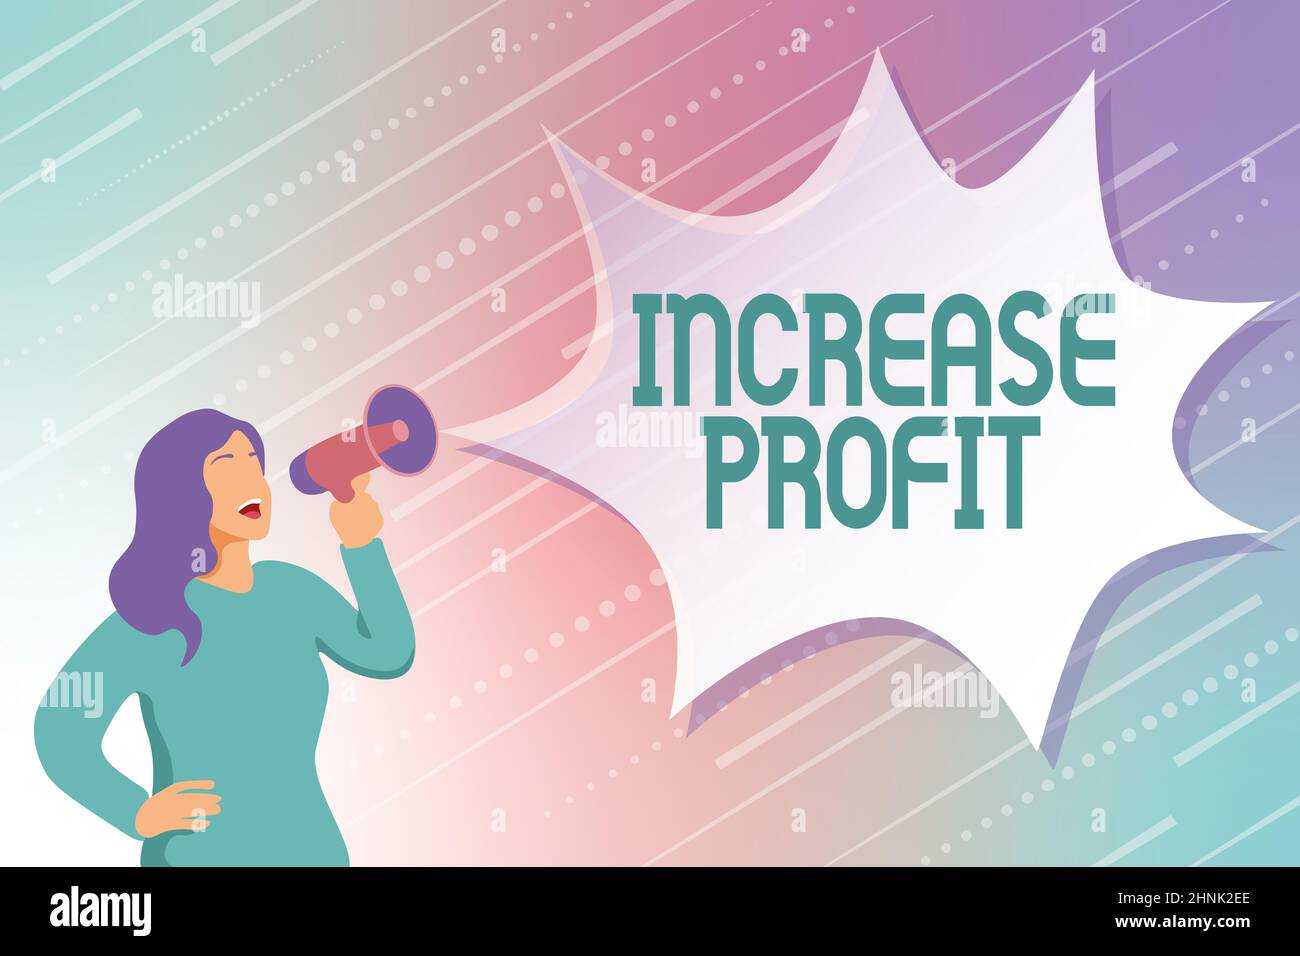 Sign displaying Increase Profit. Concept meaning amount of revenue gained from a business activity exceeds Modern Data Processing Methods, Typing And Editing Online Articles Stock Photo